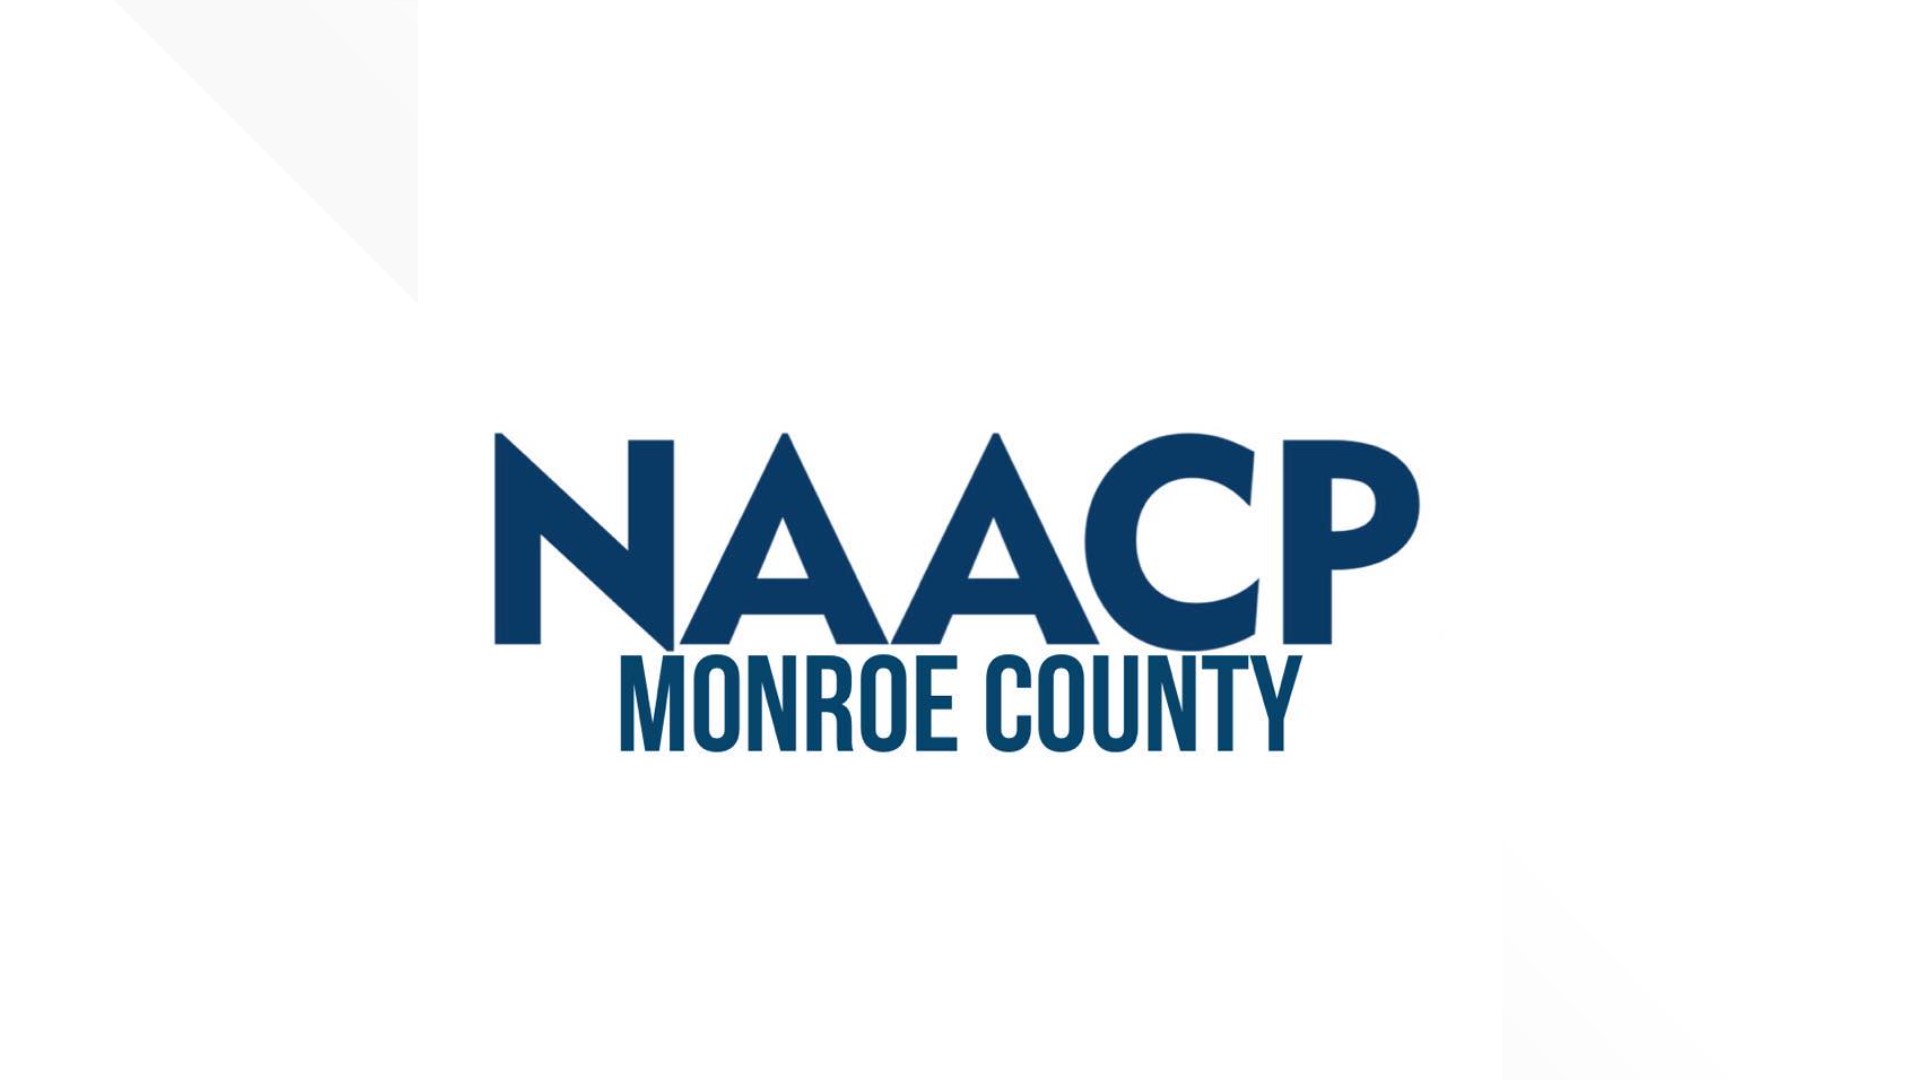 President of Monroe County NAACP reacts to Supreme Court decision